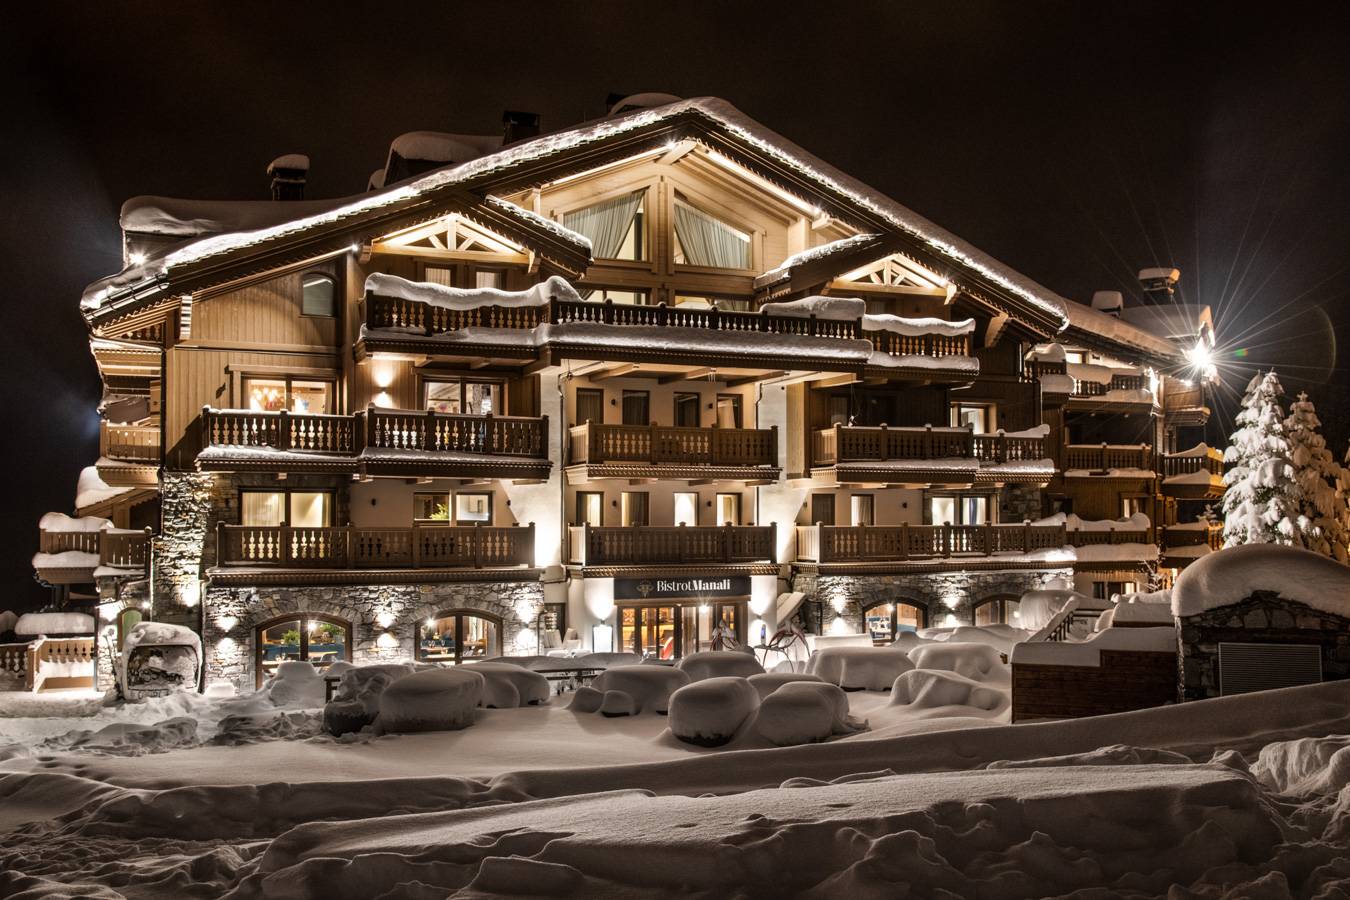 Penthouse with 4 bedrooms 1 cabin, a fireplace, a cinema room and a jacuzzi in Courchevel’s French Alps